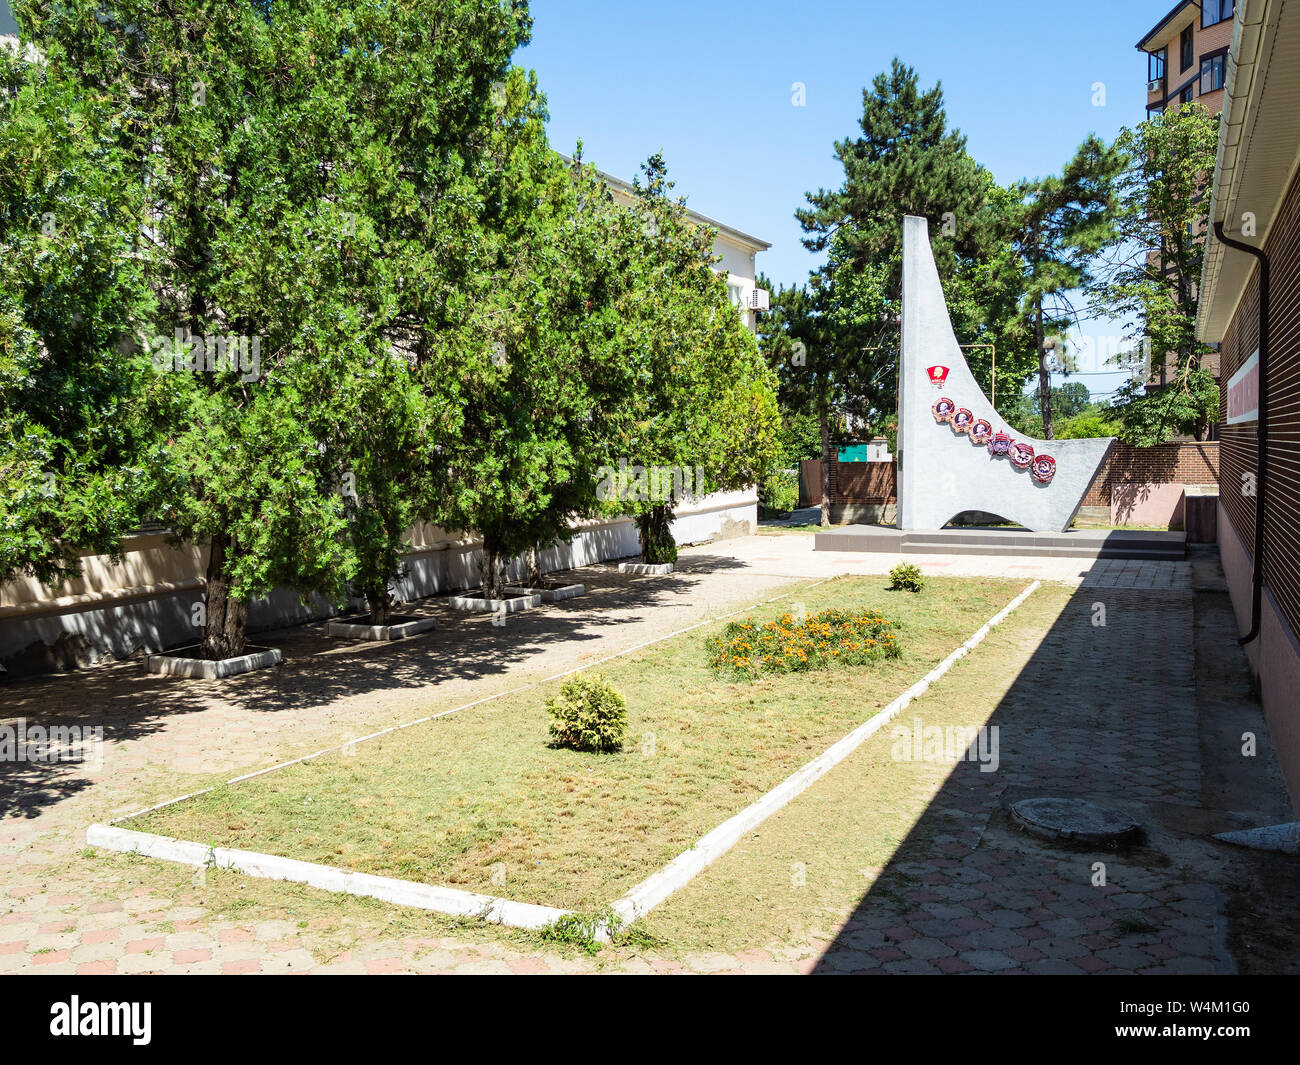 ABINSK, RUSSIA - JULY 2, 2019: Monument to Komsomol (All-Union Leninist Young Communist League) on Internatsionalnaya street in Abinsk city. Stock Photo